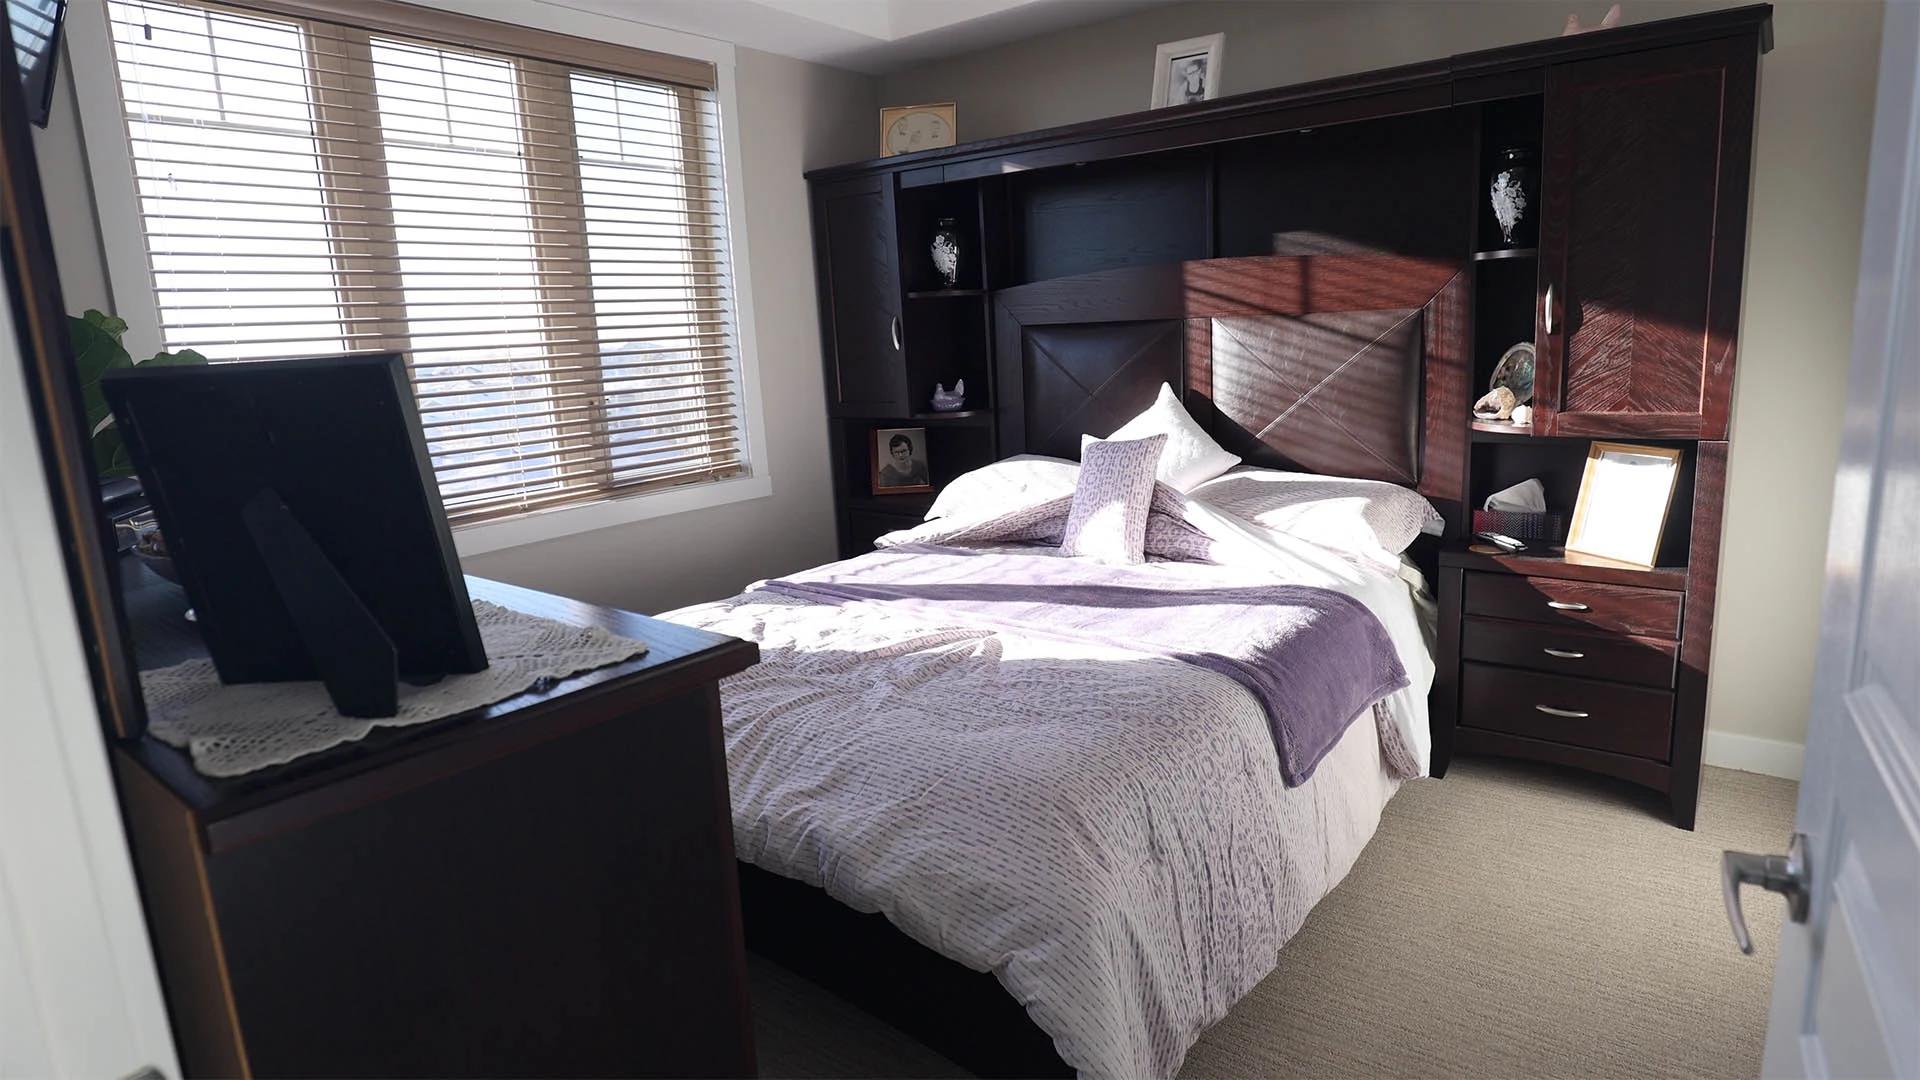 Bedroom with dark brown furniture and white and purple bedding